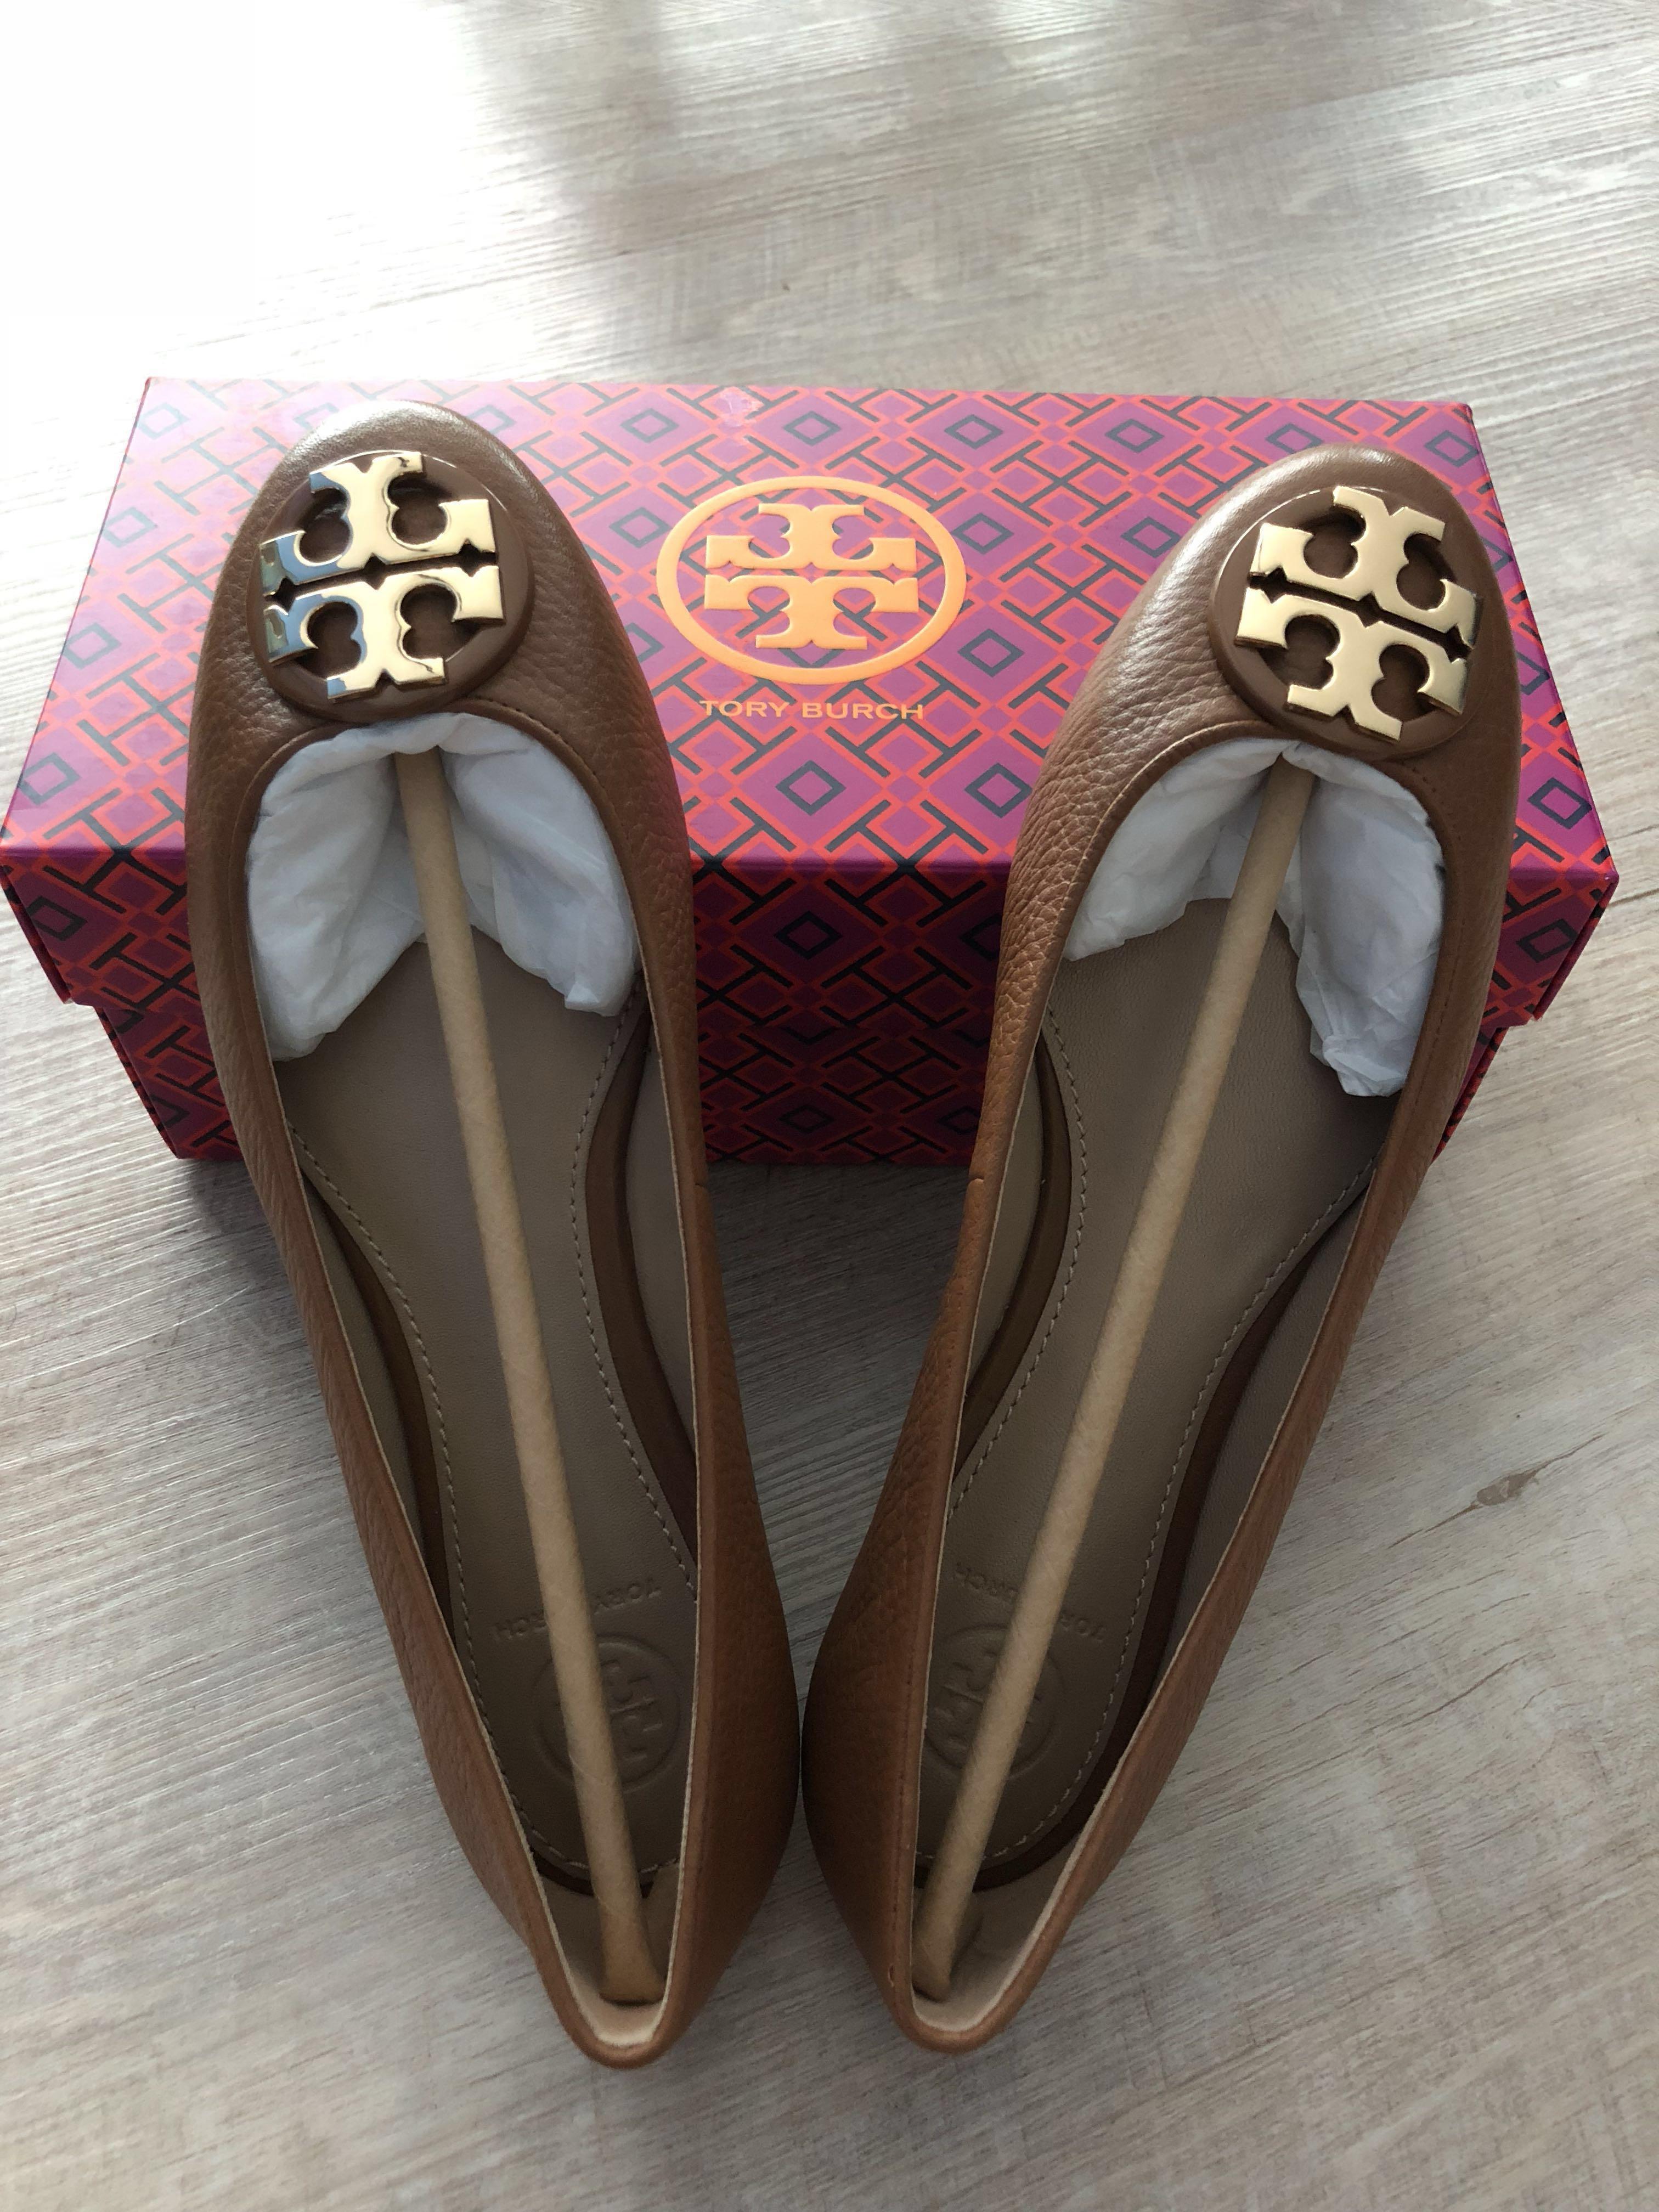 claire tory burch